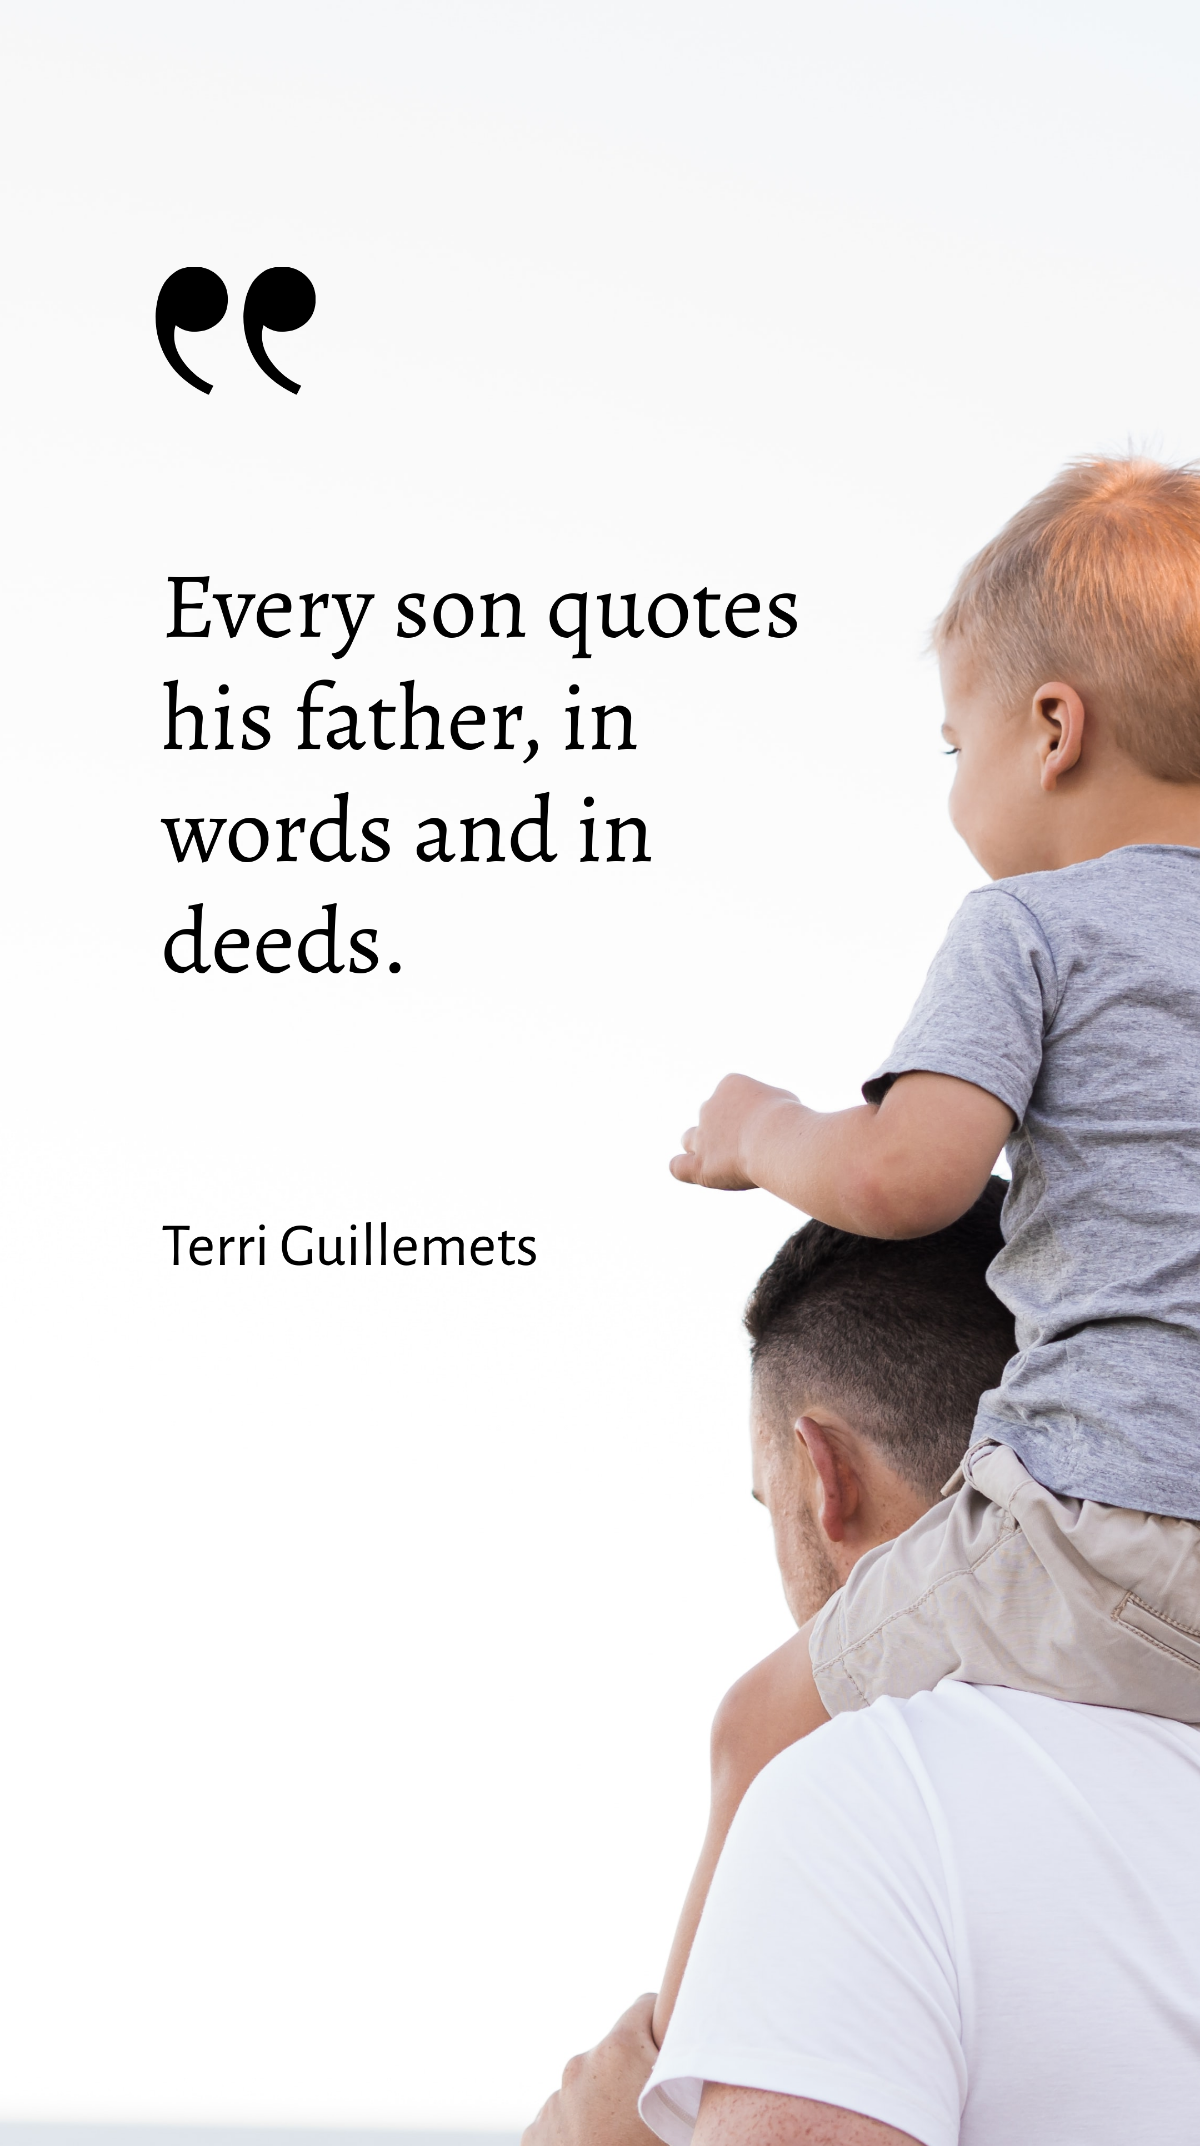 Terri Guillemets - Every son quotes his father, in words and in deeds. Template